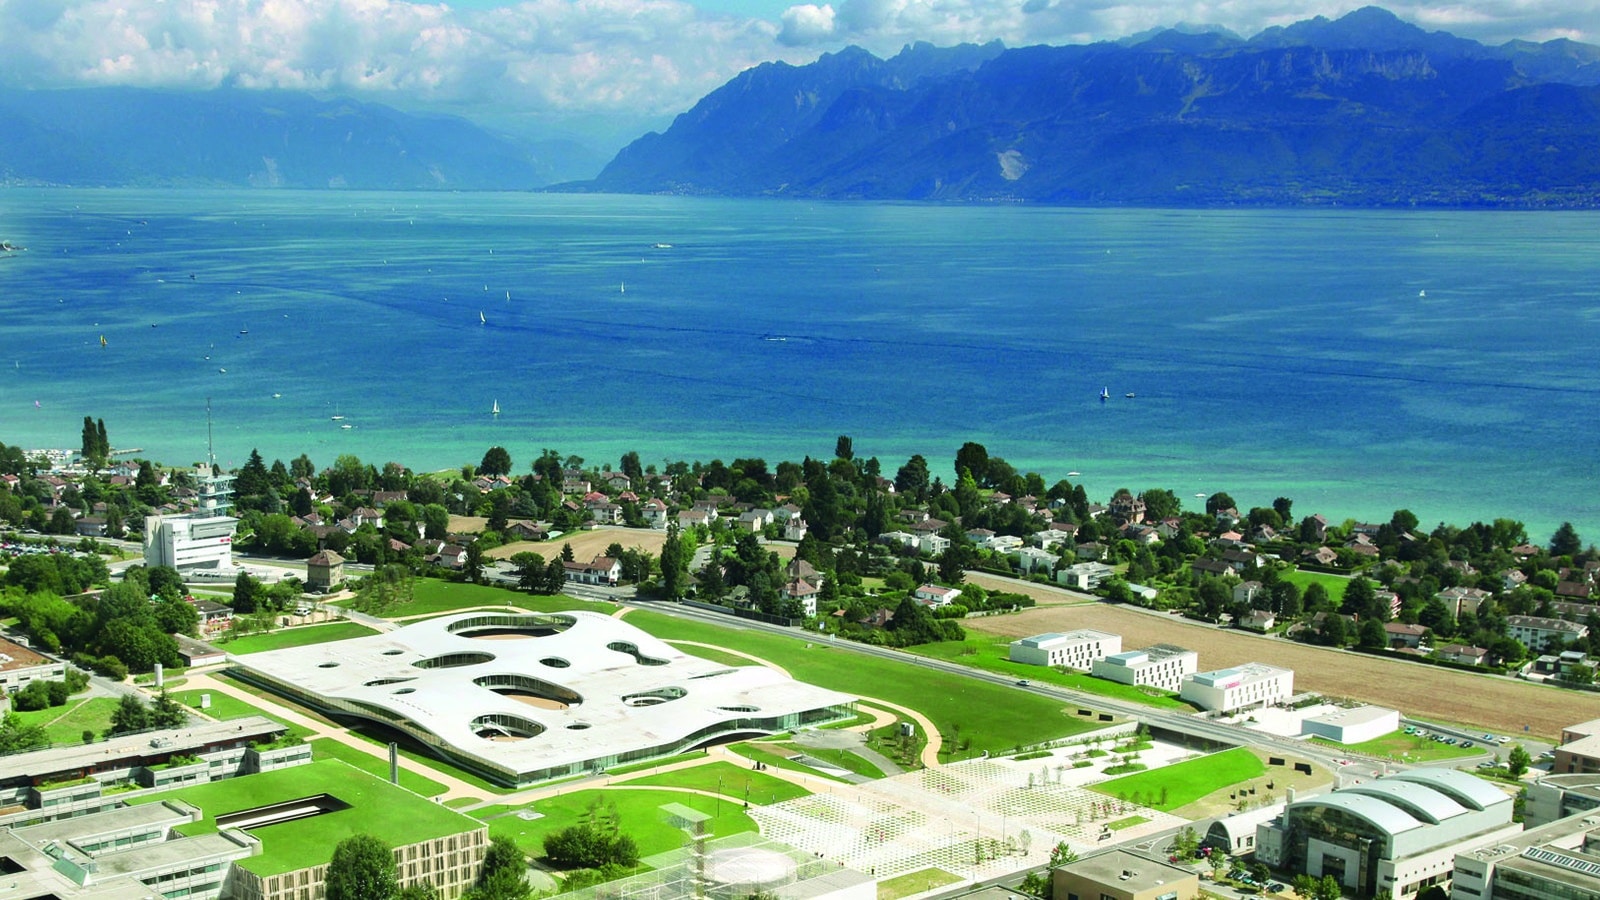 EPFL opens a cybersecurity center - Darest Informatic